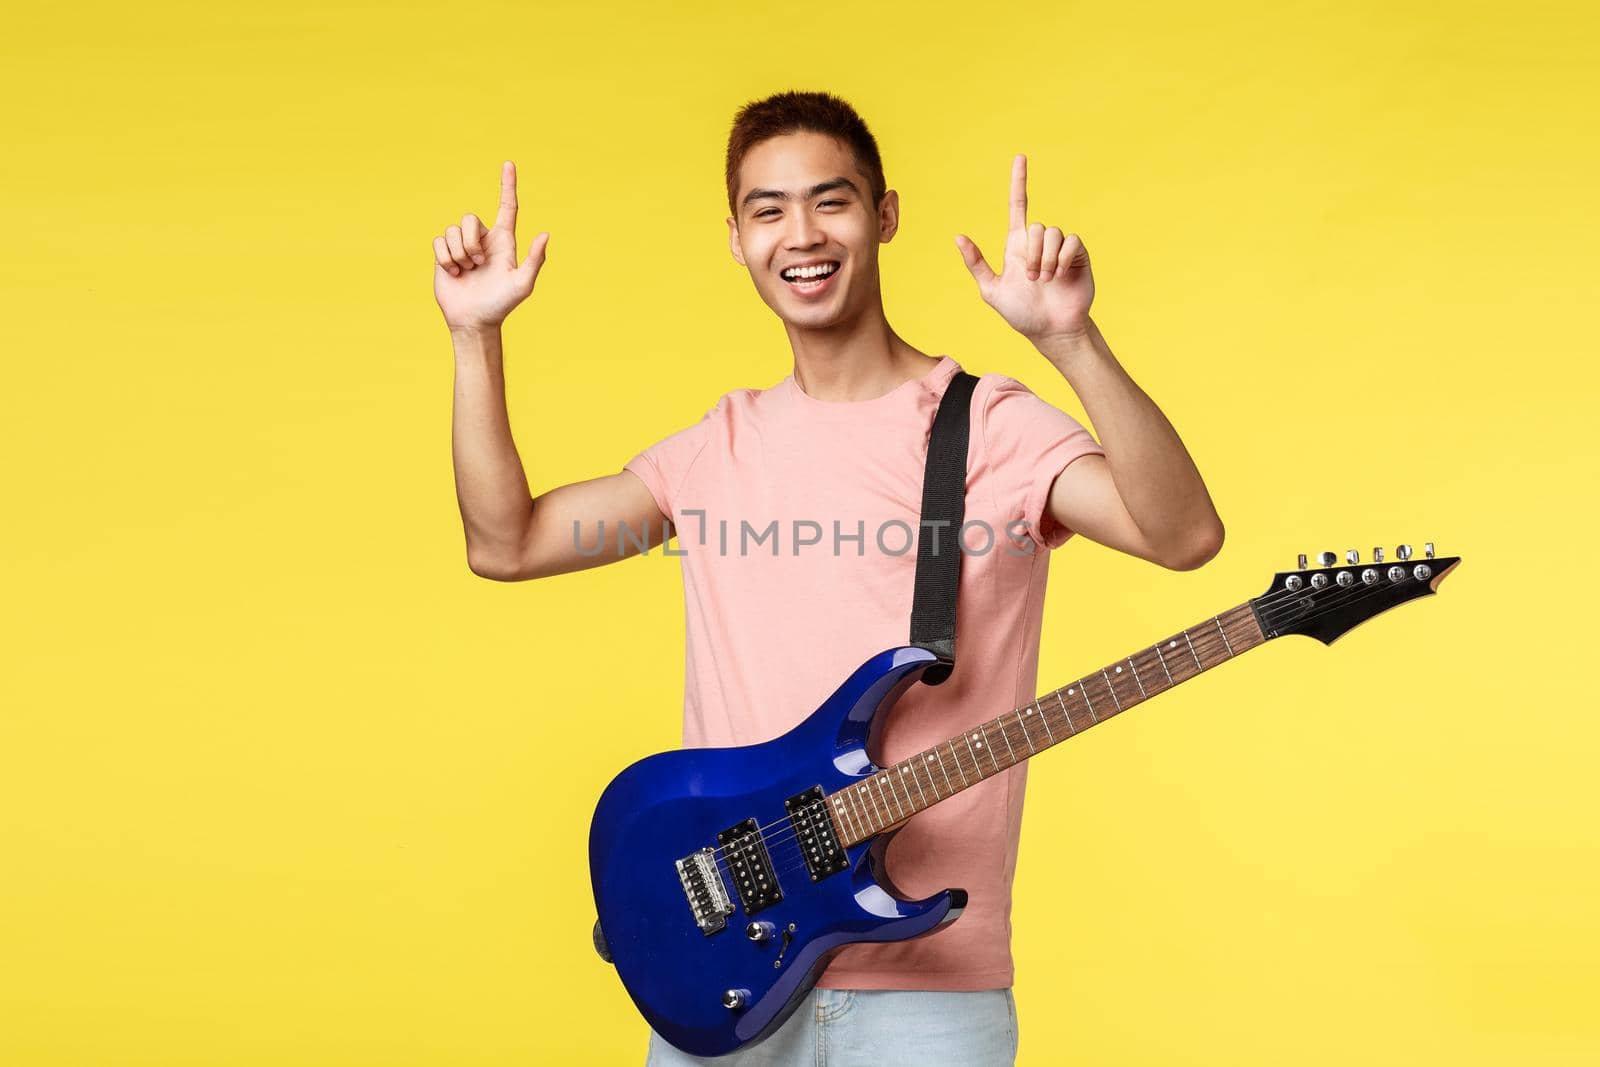 Lifestyle, leisure and youth concept. Happy enthusiastic handsome young asian male pointing fingers up, performing on stage, holding electric guitar and smiling, yellow background.